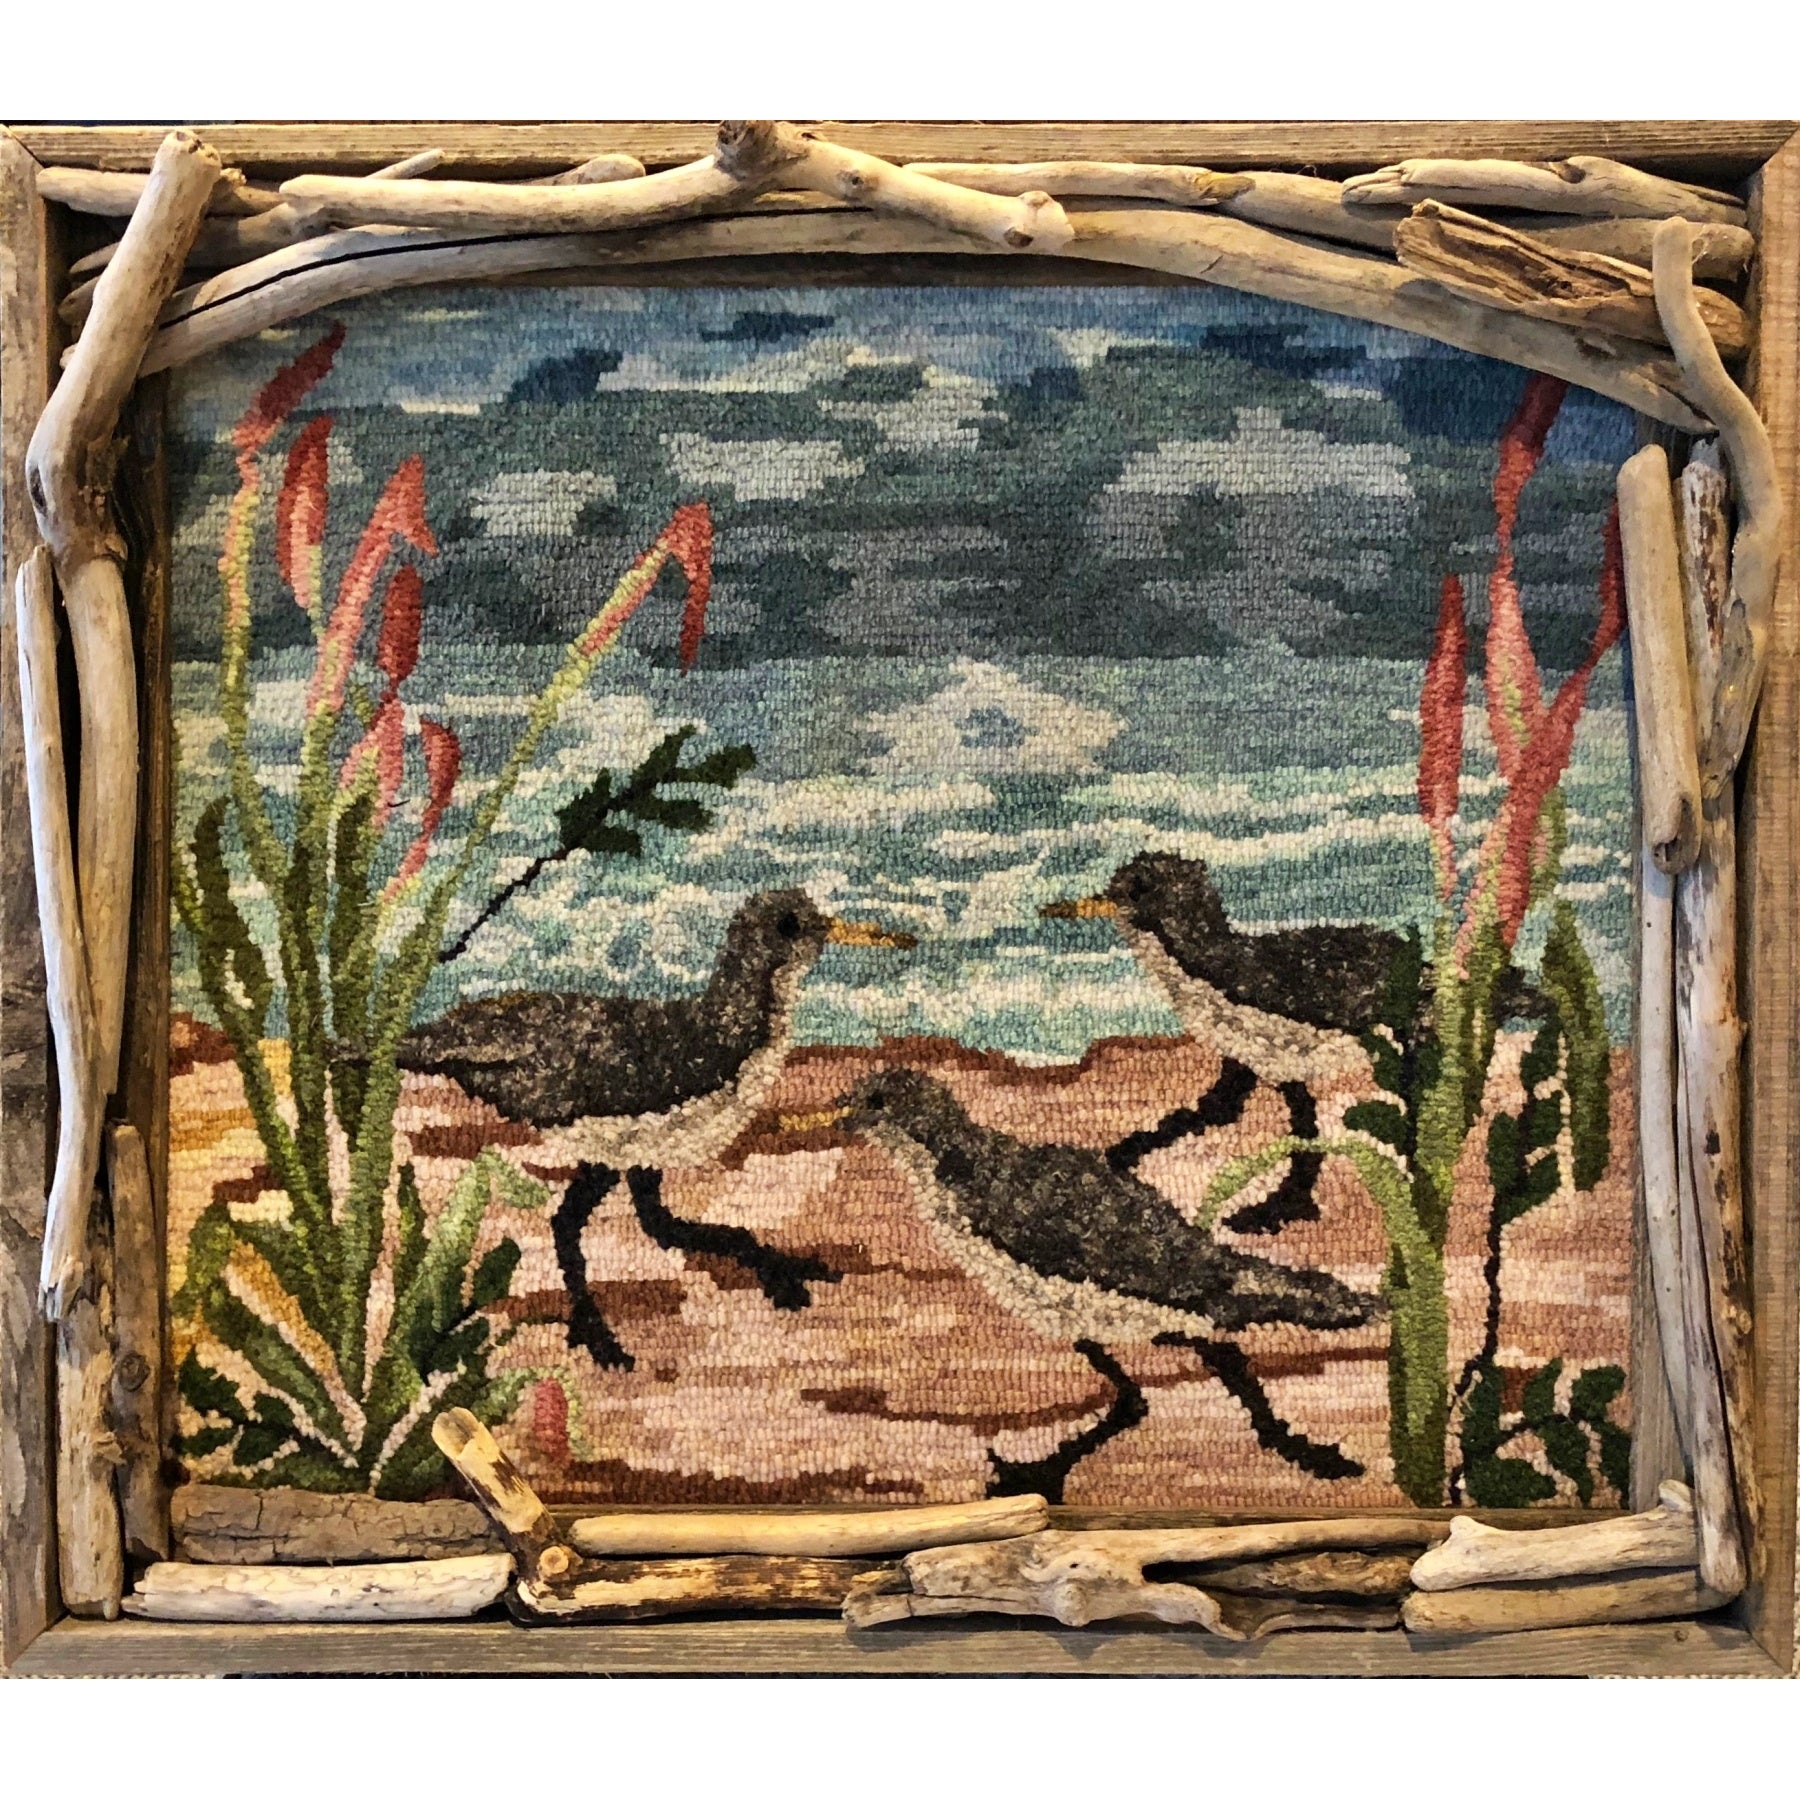 Sandpipers, rug hooked by Linda Wills